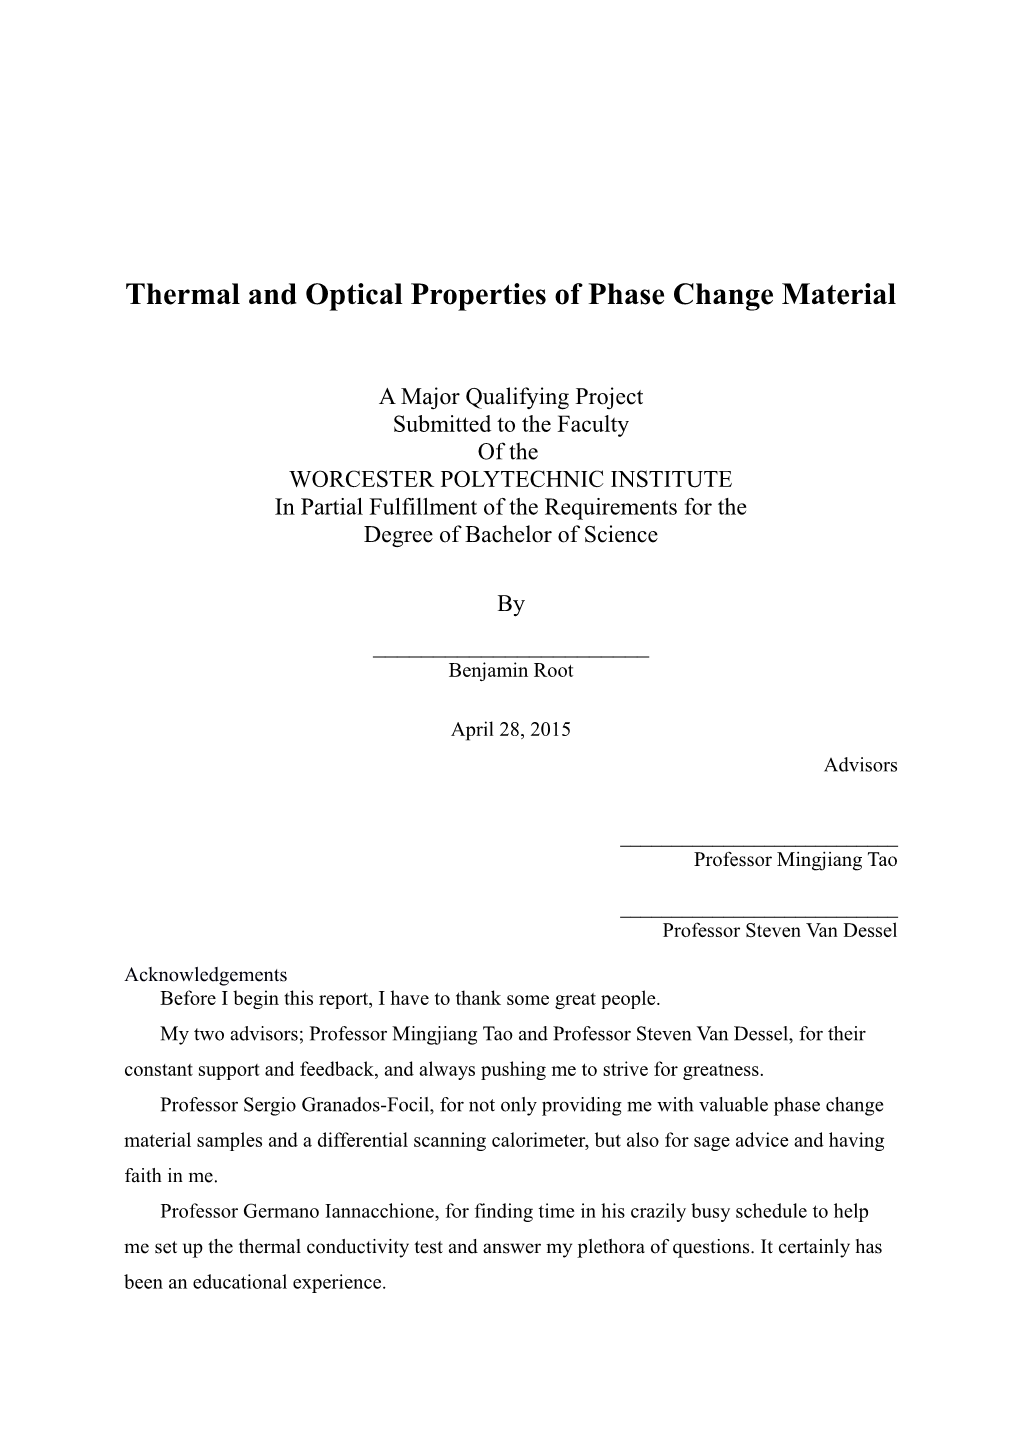 Thermal and Optical Properties of Phase Change Material